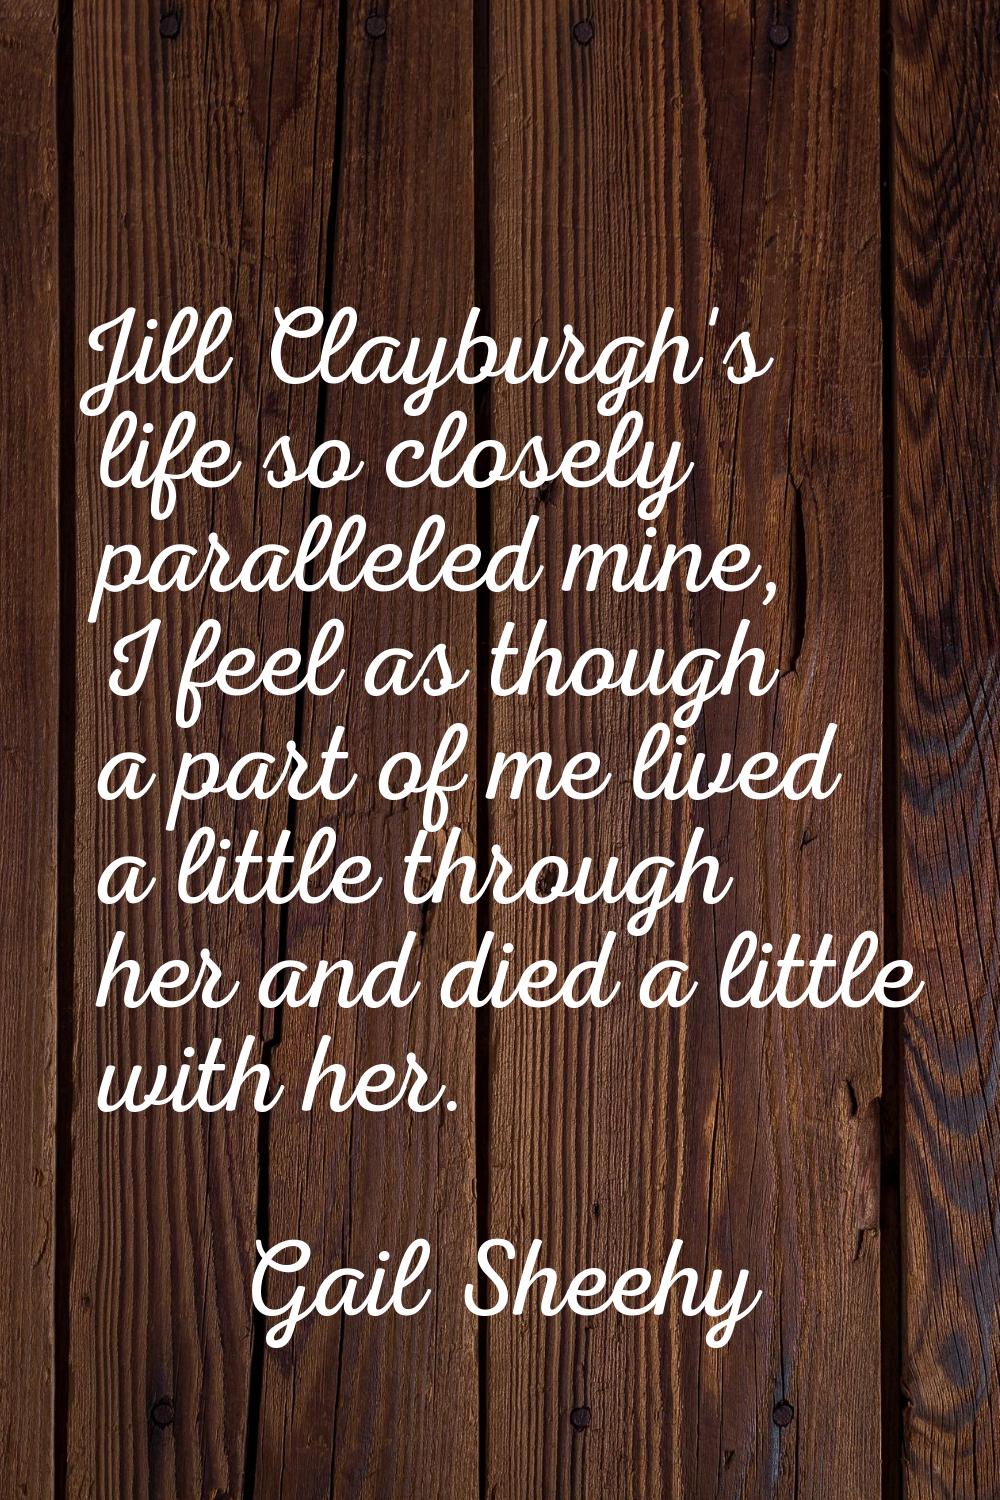 Jill Clayburgh's life so closely paralleled mine, I feel as though a part of me lived a little thro